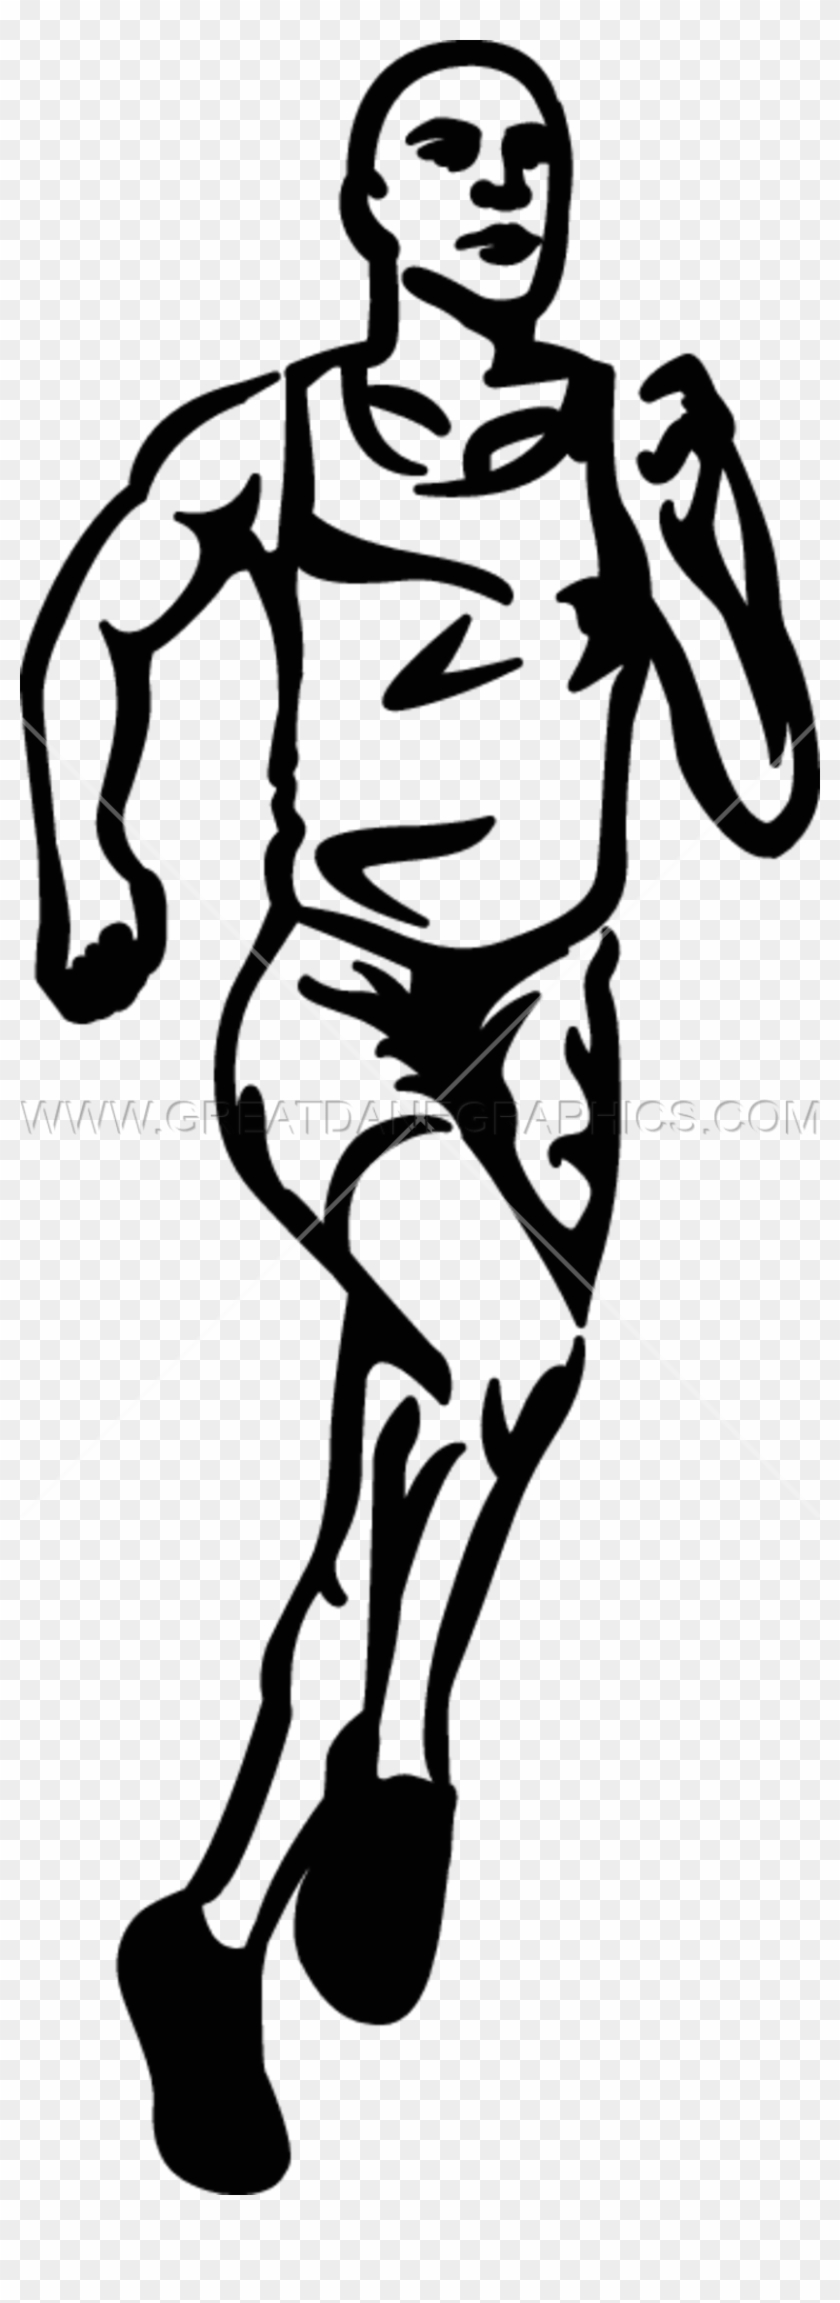 Image Black And White Stock Production Ready Artwork - Track And Field Athletics #1354569